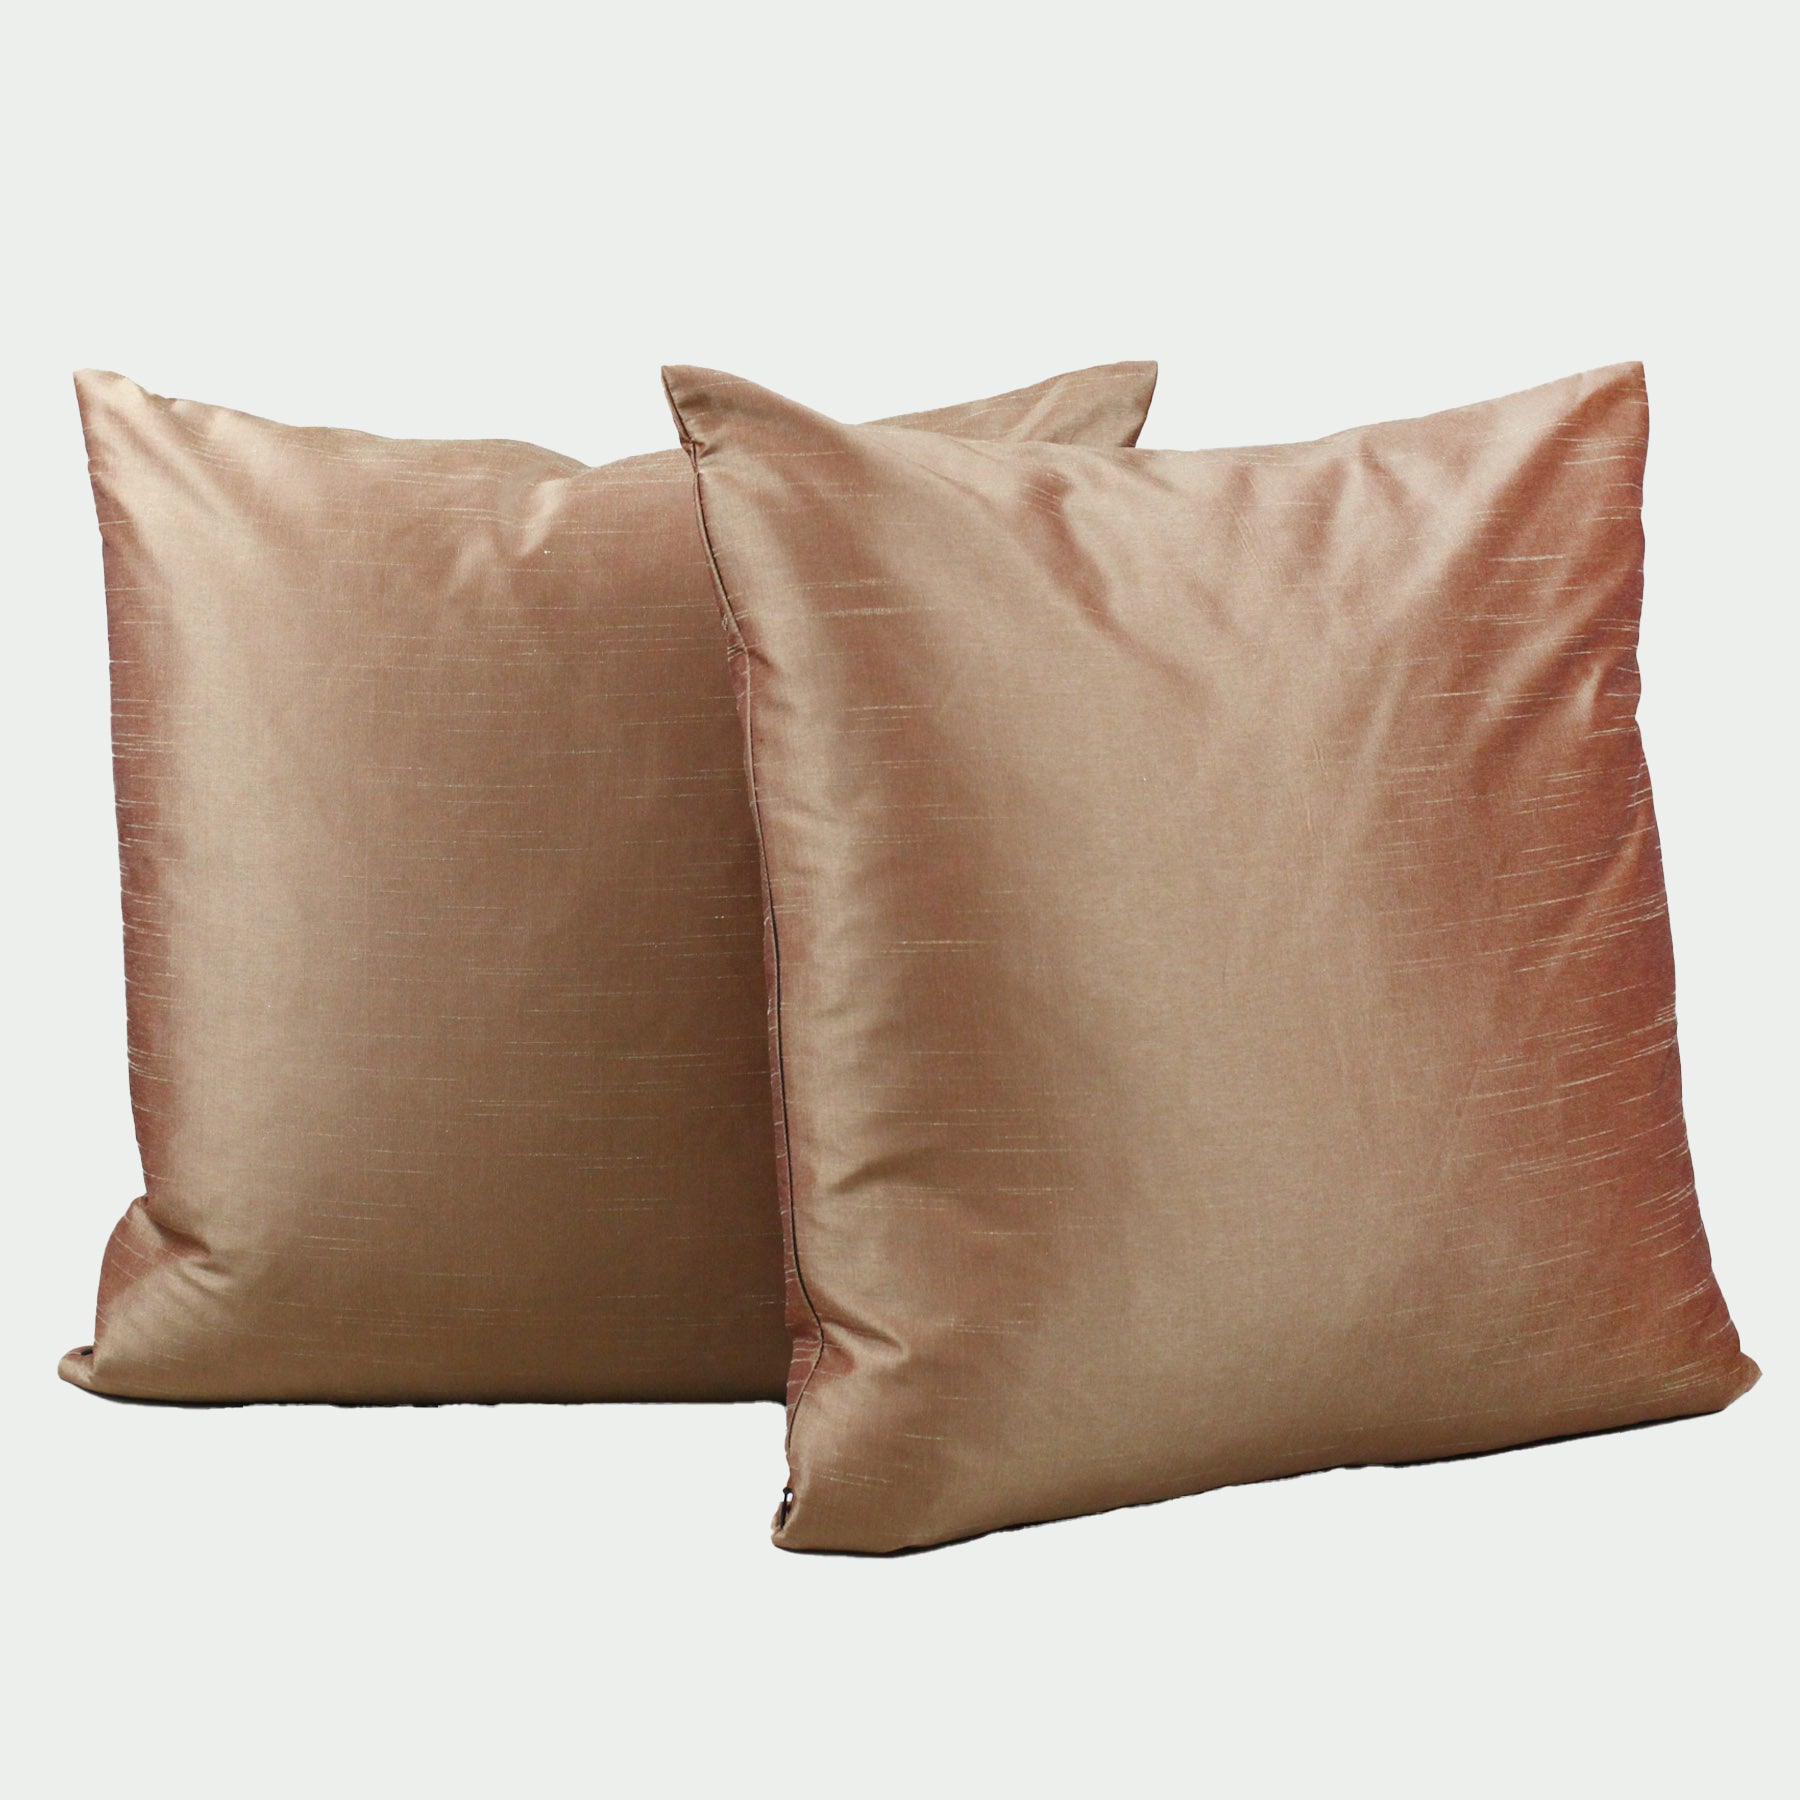 spice collection aromatherapy pillows, square